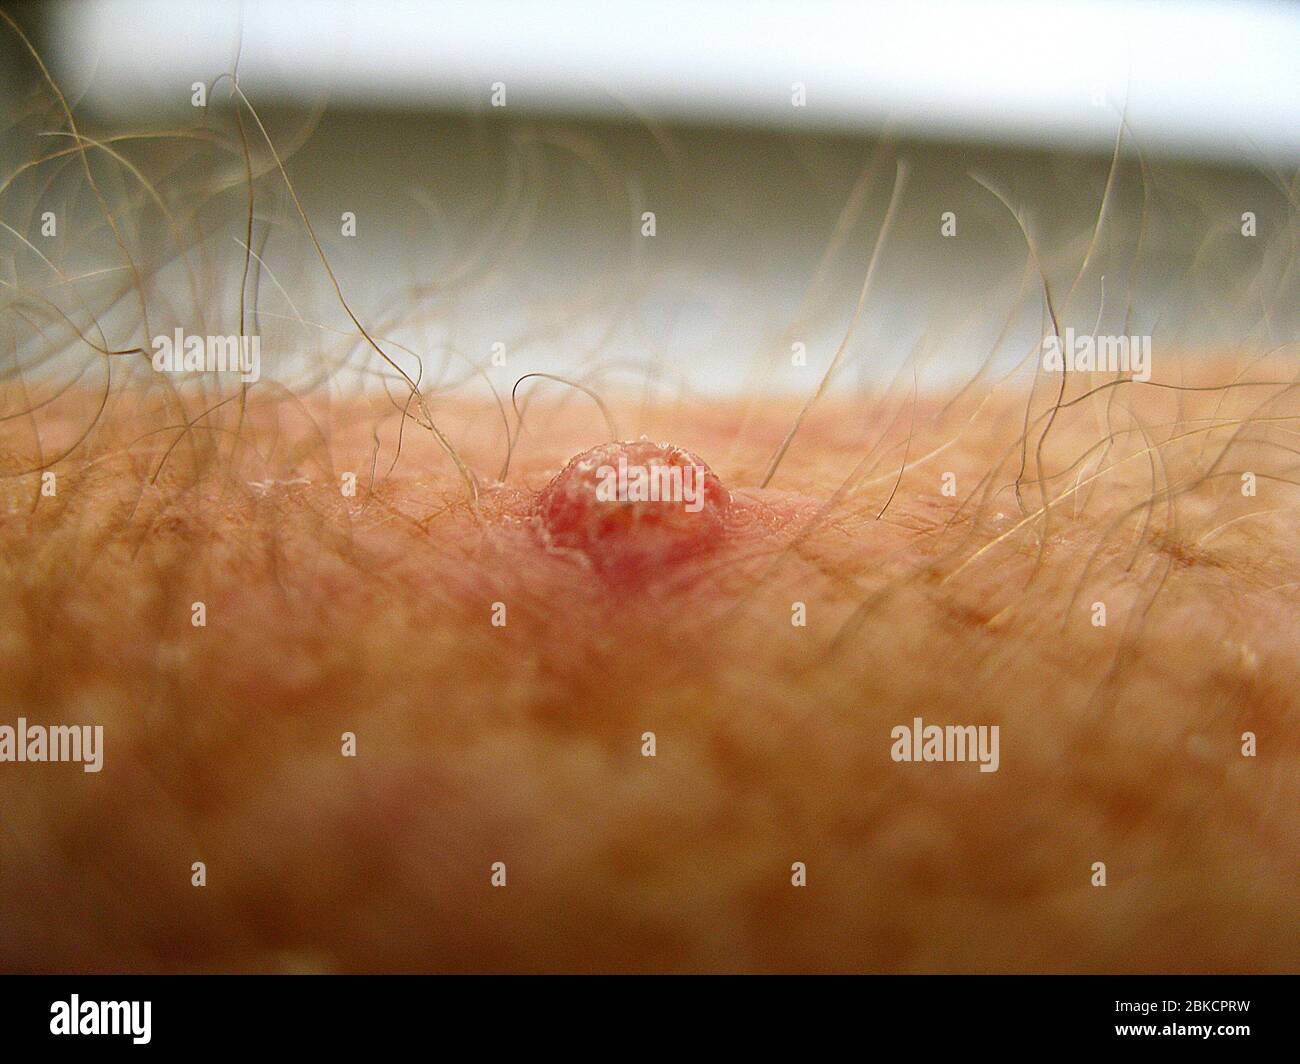 Skin cancer is evident in this angled view of a squamous cell carcinoma on the hairy arm of a Caucasian man. Most often caused by years of exposure to the sun's ultraviolet rays, it is one of the most common types of skin cancer. Treatment for such hard lumps with scaly tops is usually surgical removal by a dermatologist. Avoiding prolonged exposure to ultraviolet radiation and the use of sunscreen are recommended ways to prevent skin cancers. Stock Photo